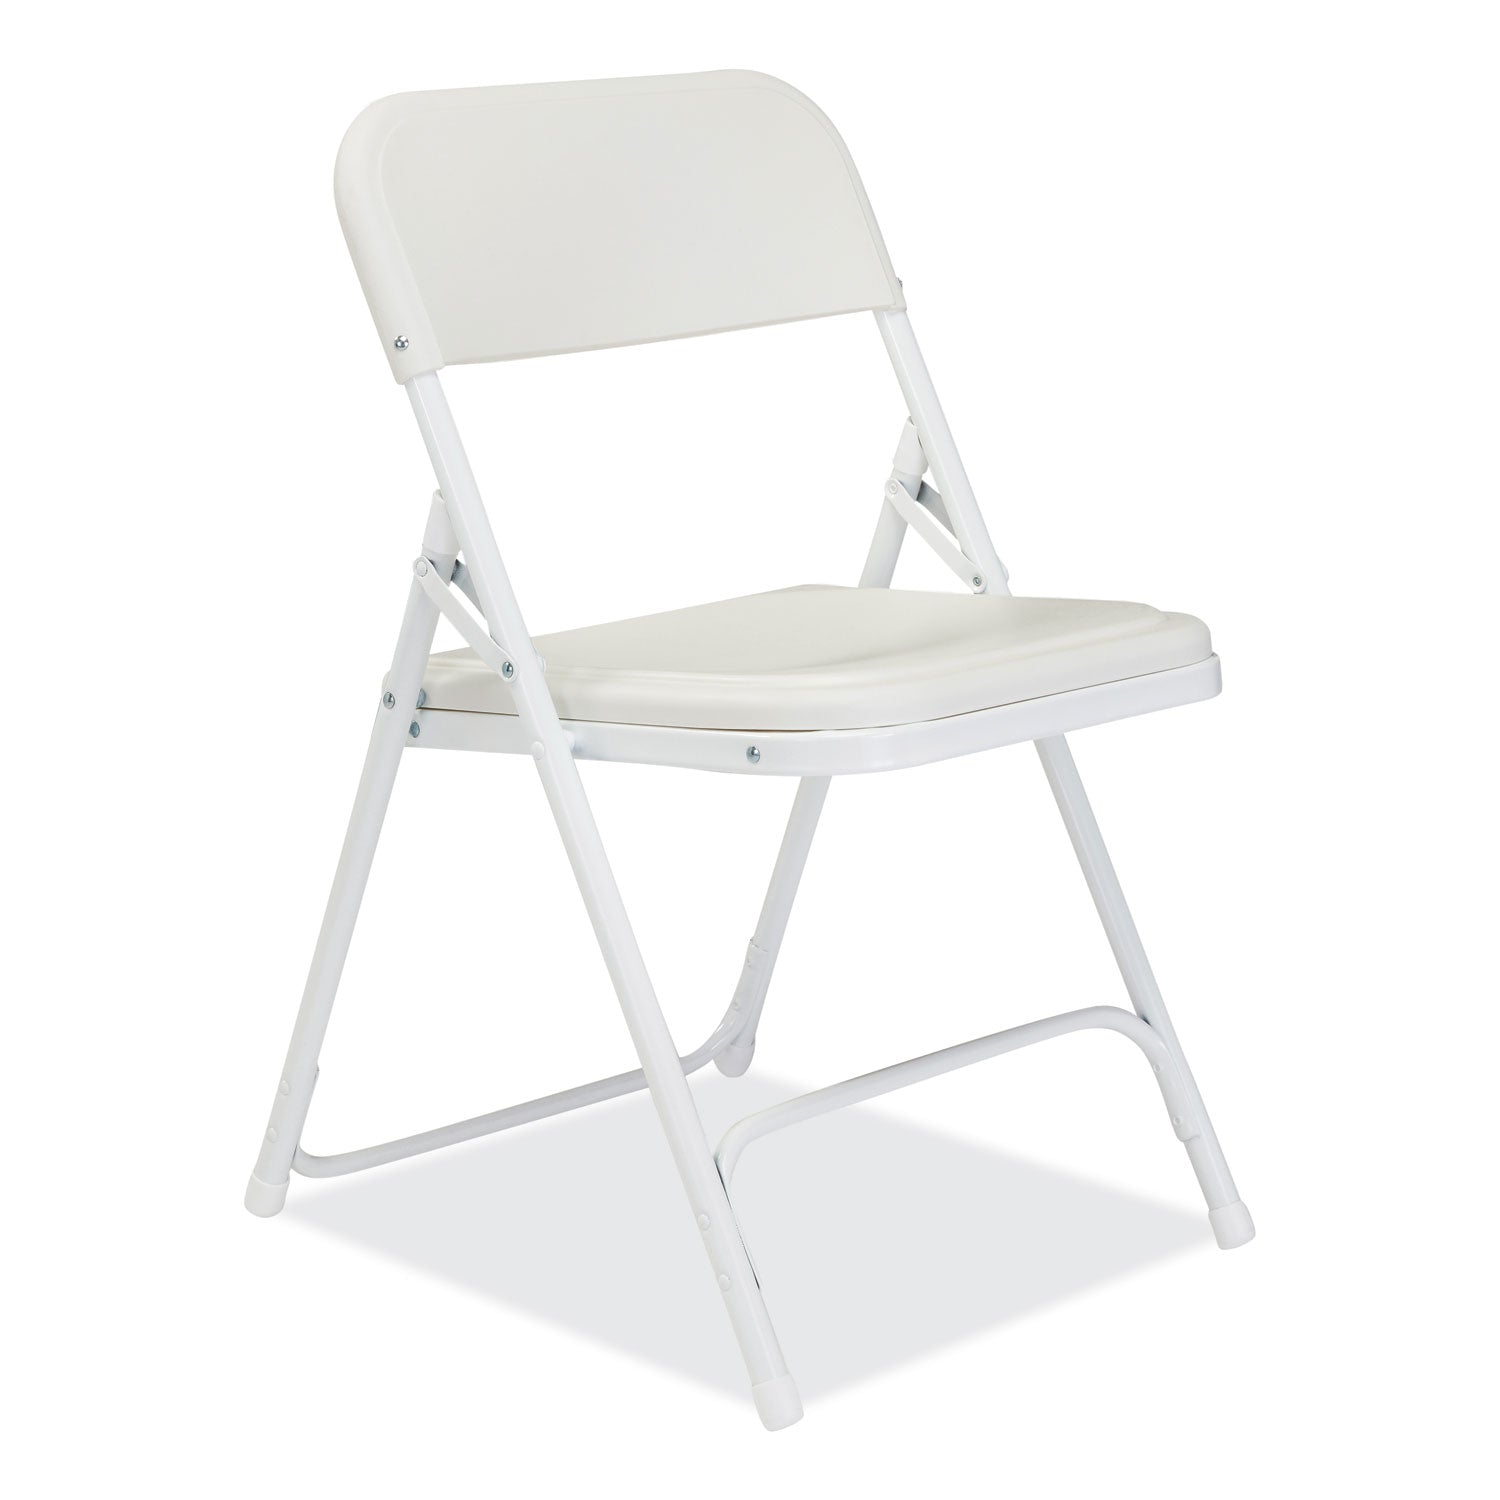 800-series-plastic-folding-chair-supports-500-lb-18-seat-ht-bright-white-seat-white-base-4-ct-ships-in-1-3-bus-days_nps821 - 2